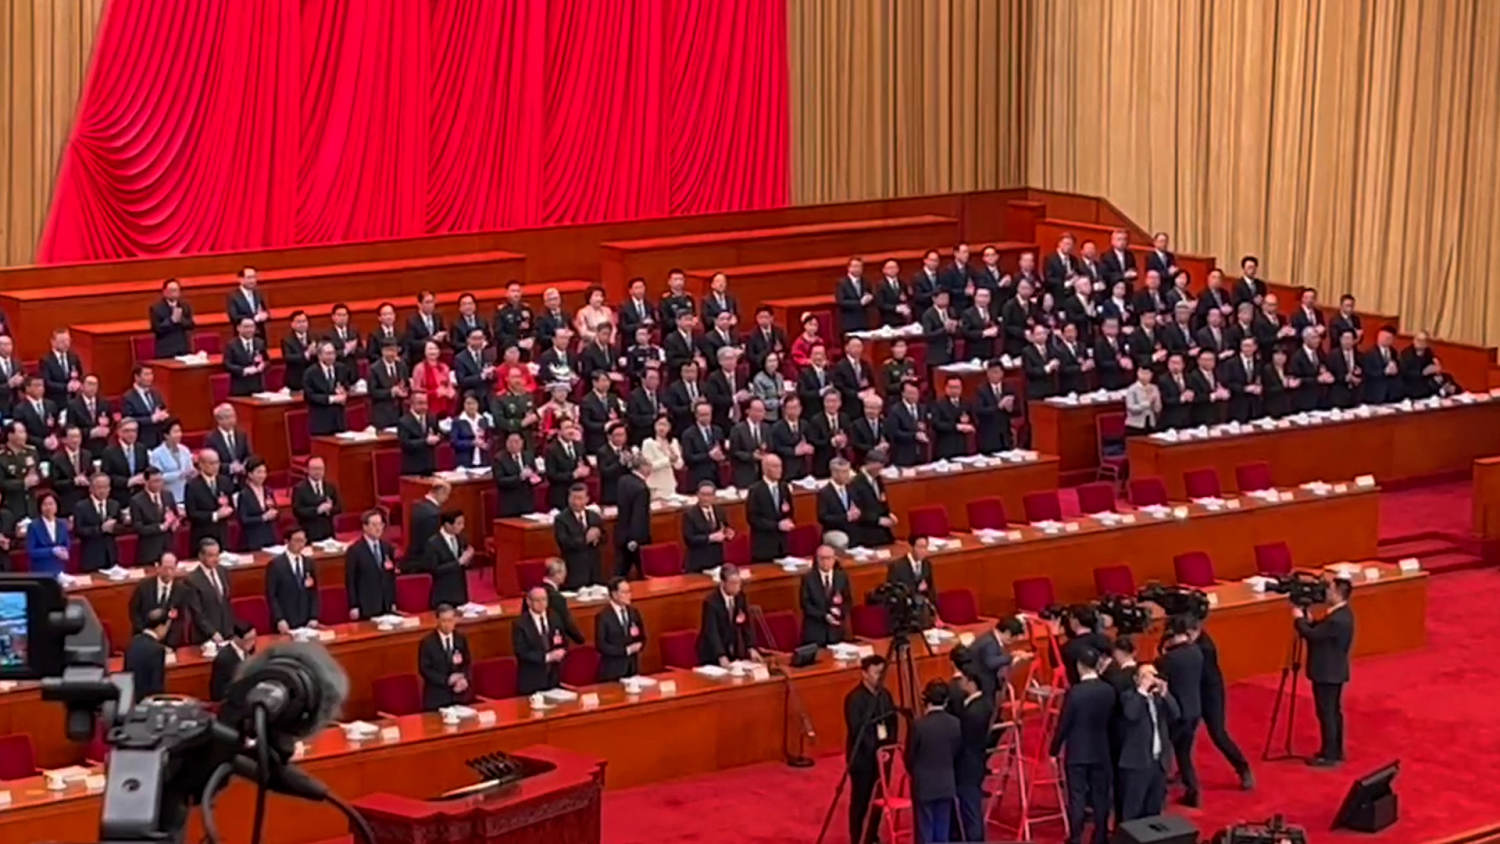 Chinese officials take the stage as the National People’s Congress begins